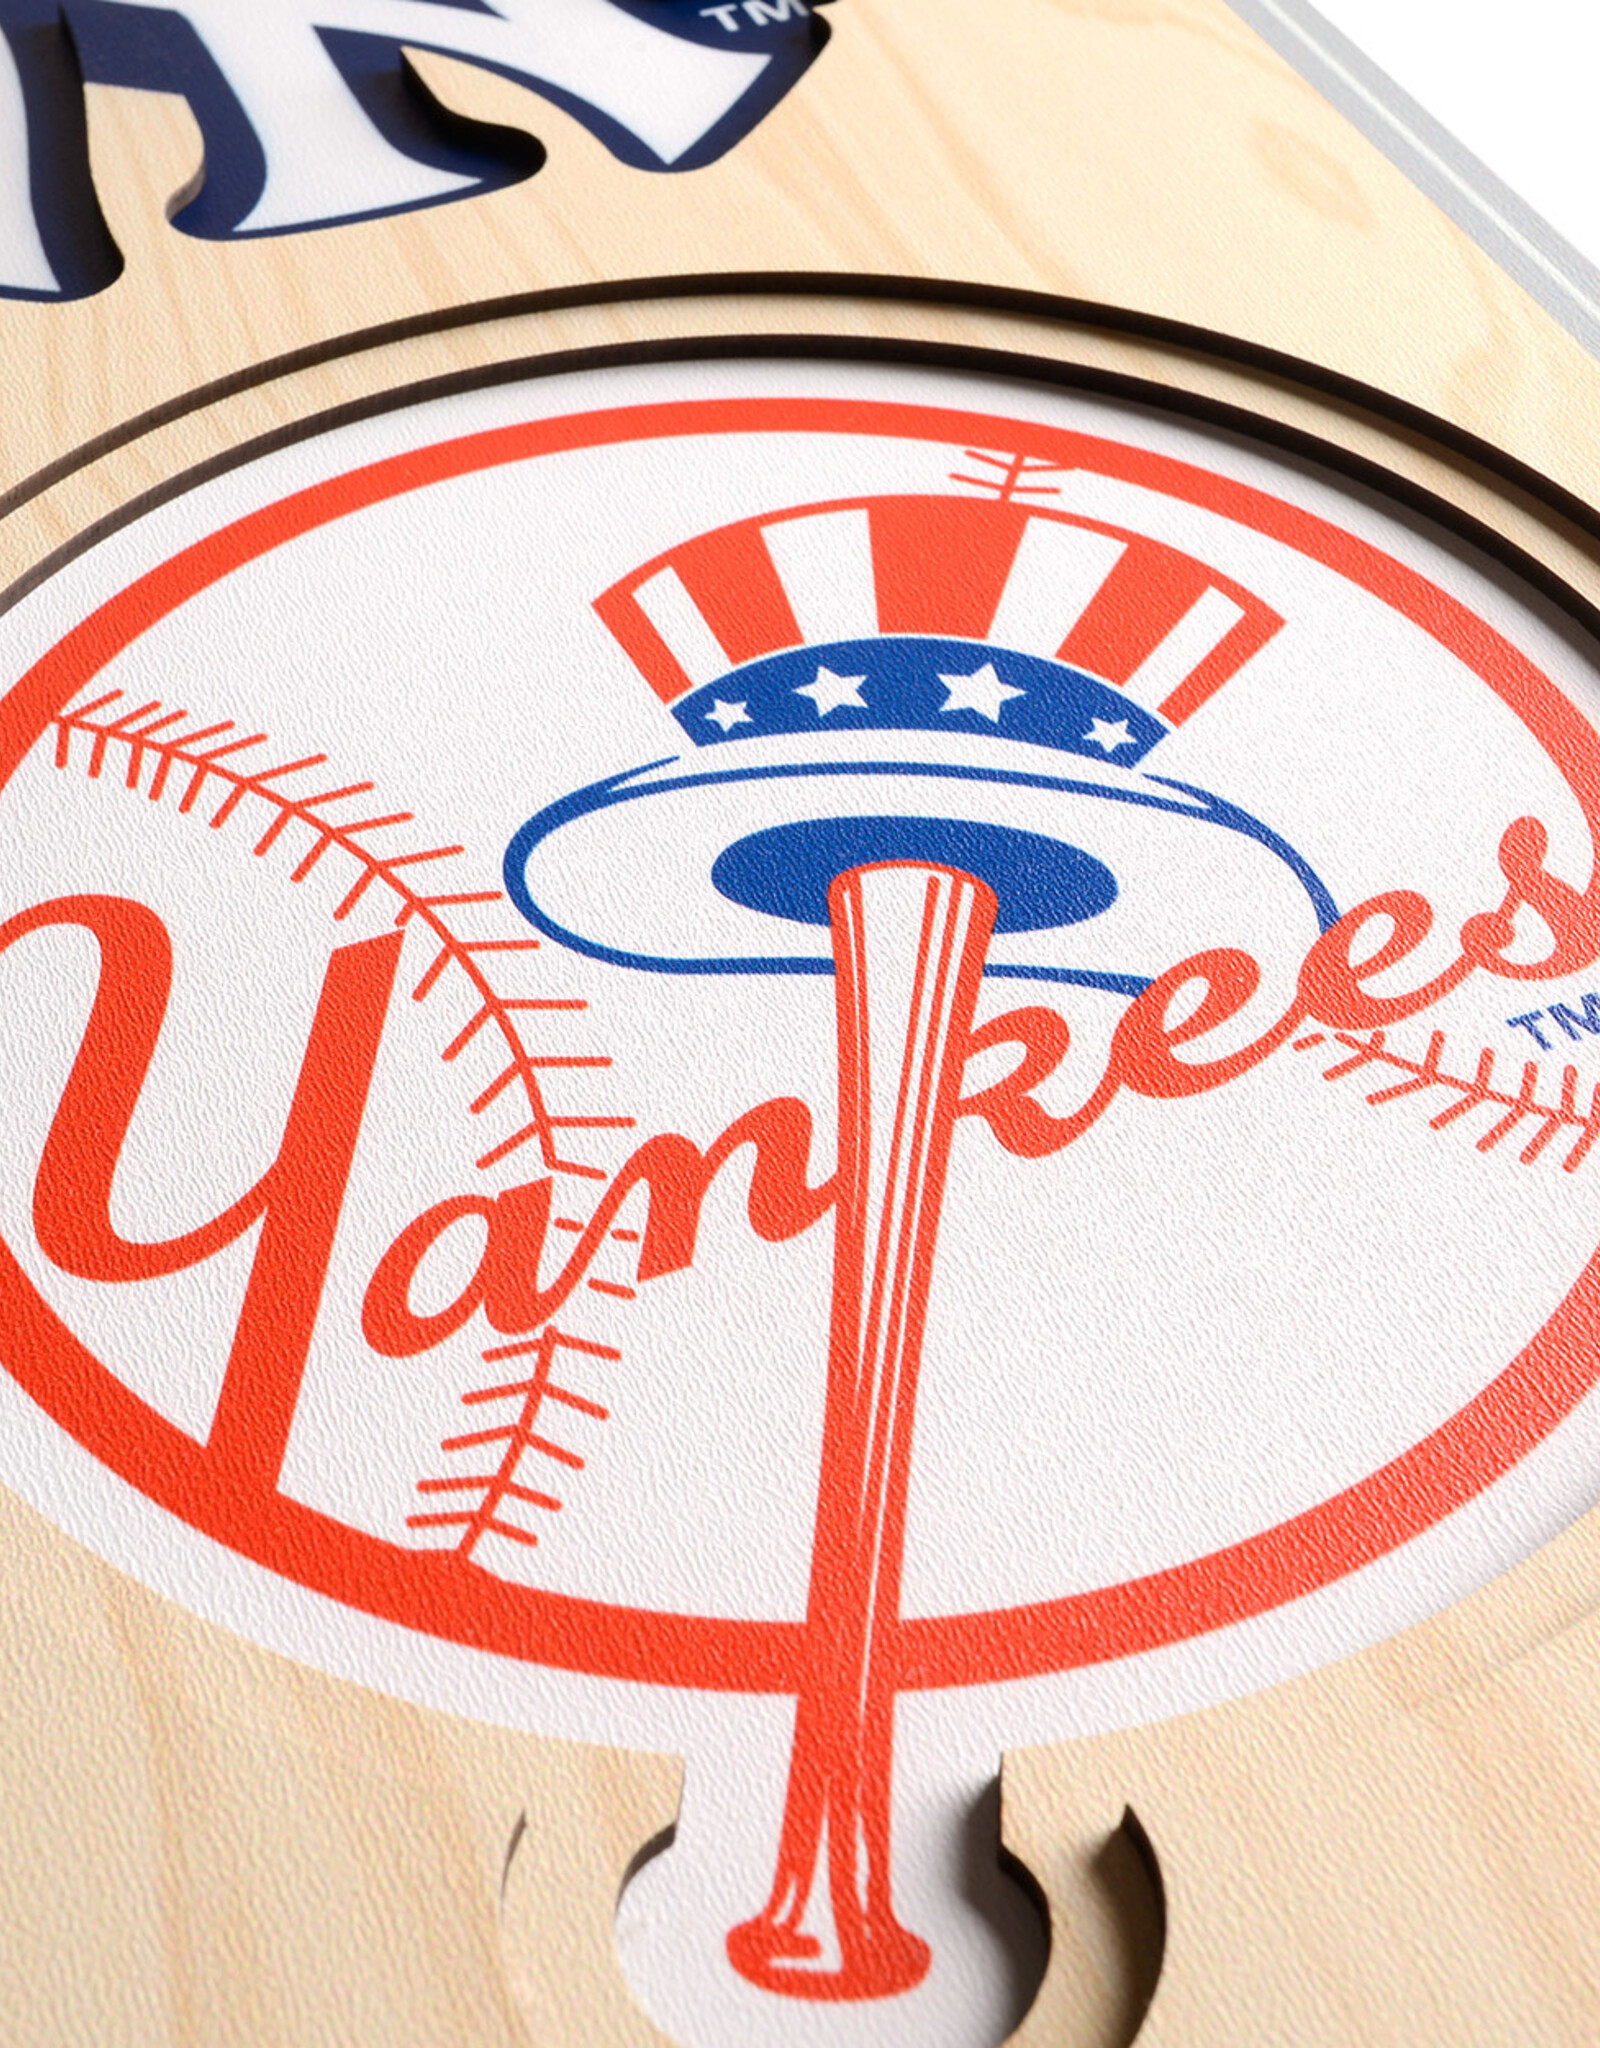 YOU THE FAN New York Yankees 3D StadiumView 8x32 Banner